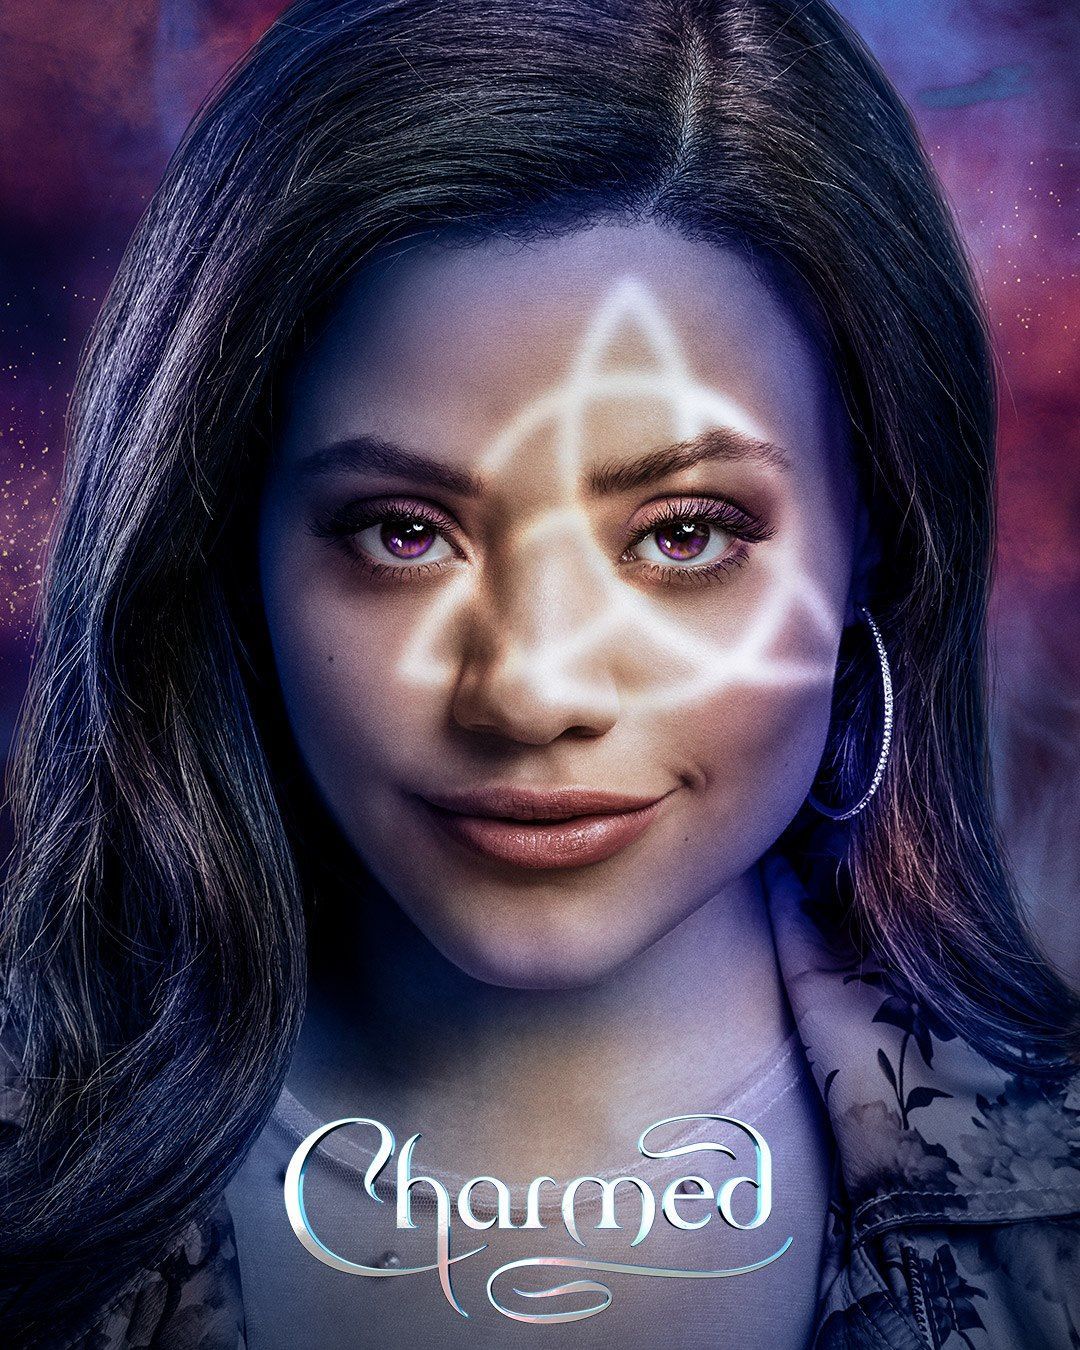 Charmed Wallpaper iPhone 1080x1350